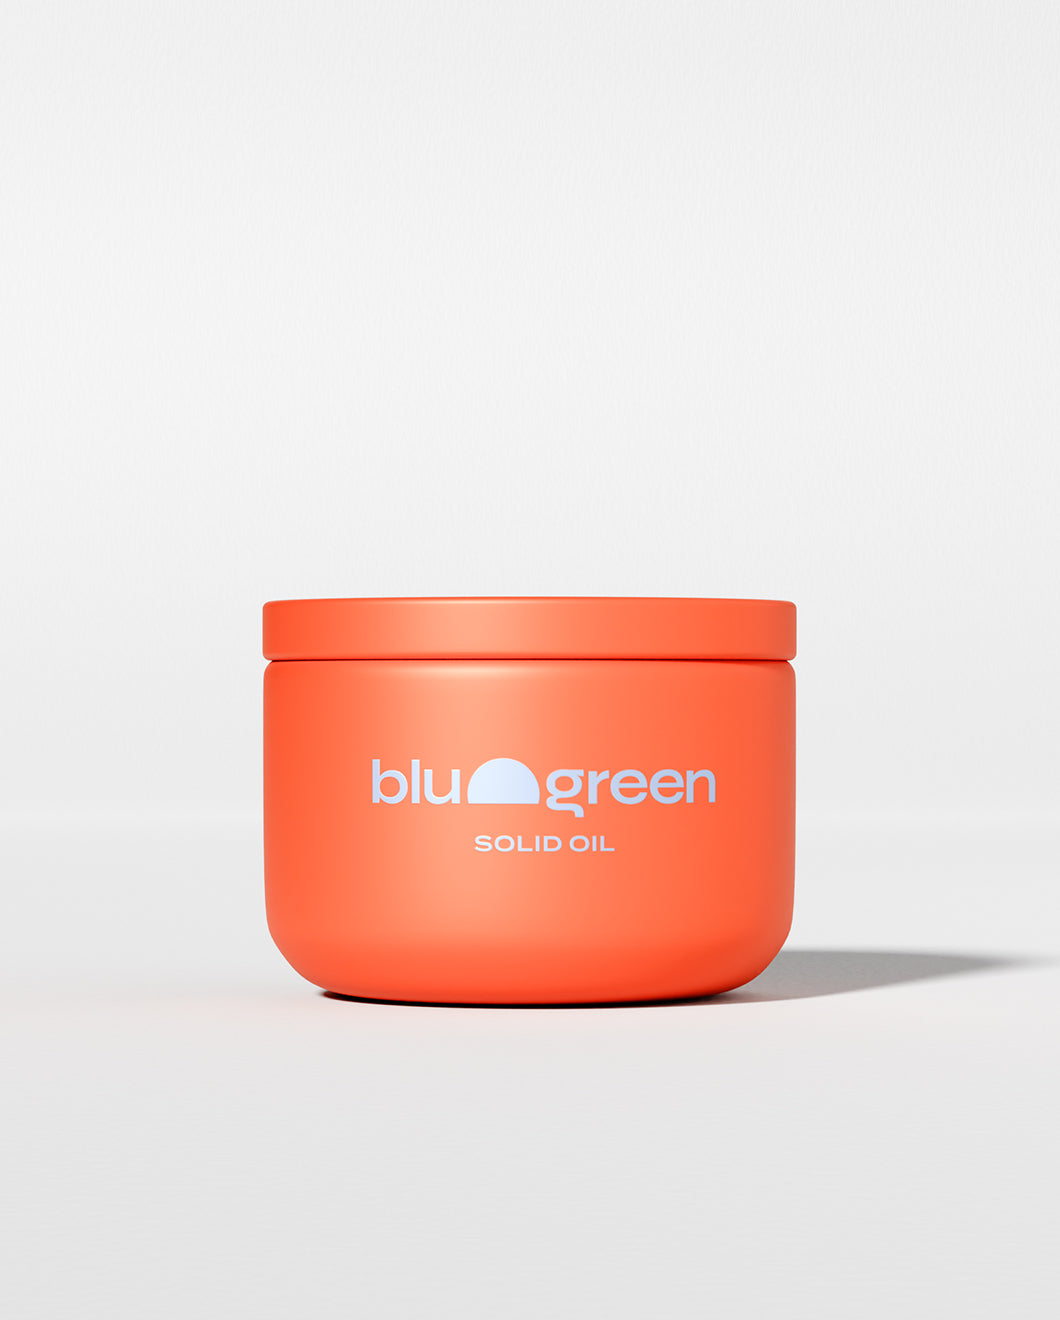 blu and green solid oil 1oz tin jar warm red with pale blue logo, studio photography, white ground, and strong light.